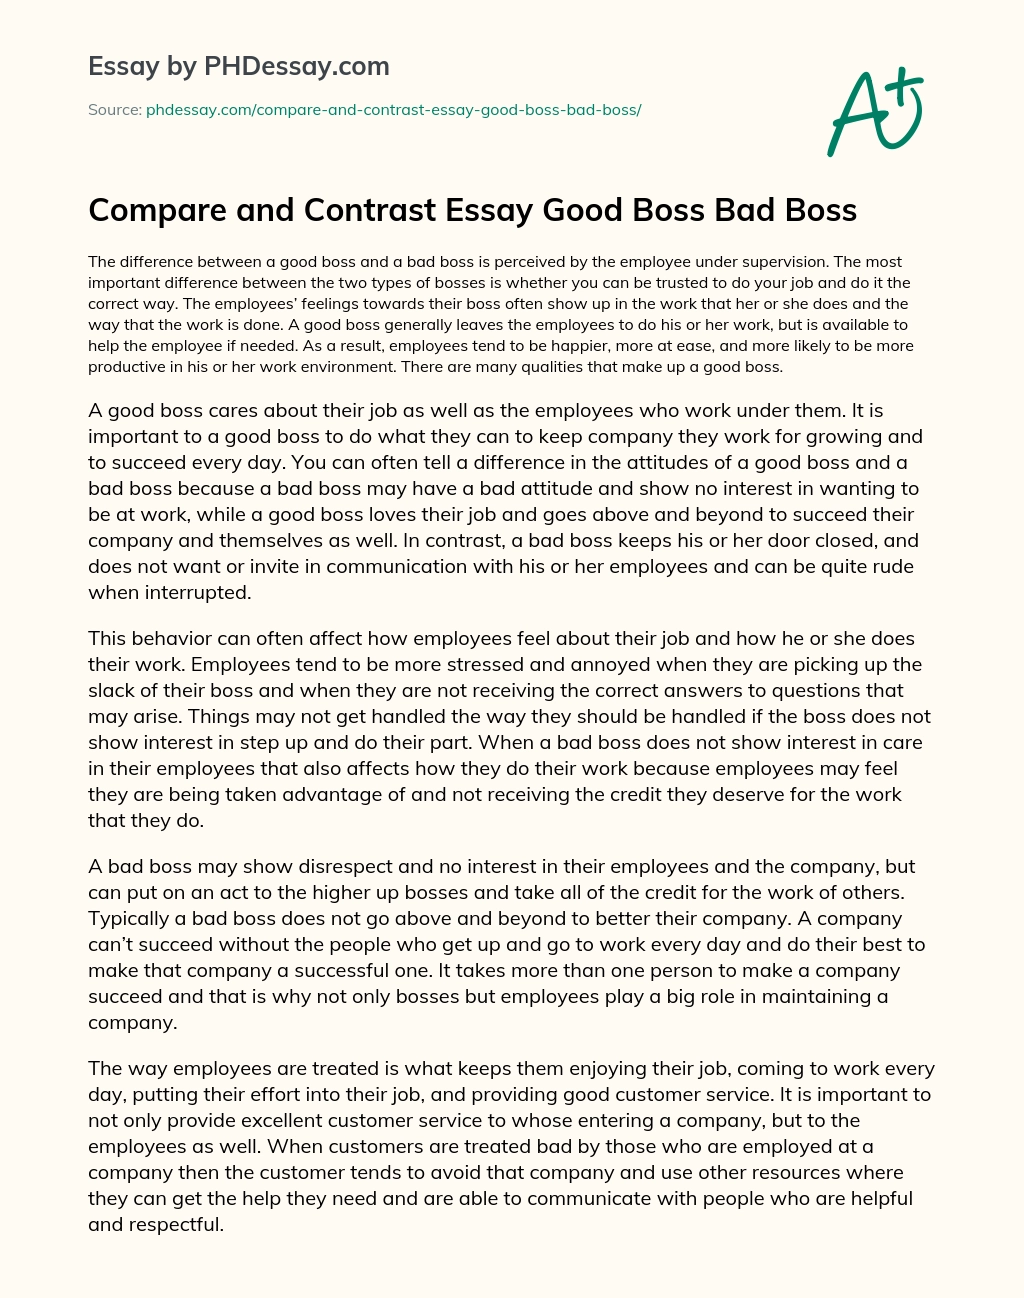 Compare and Contrast Essay Good Boss Bad Boss essay